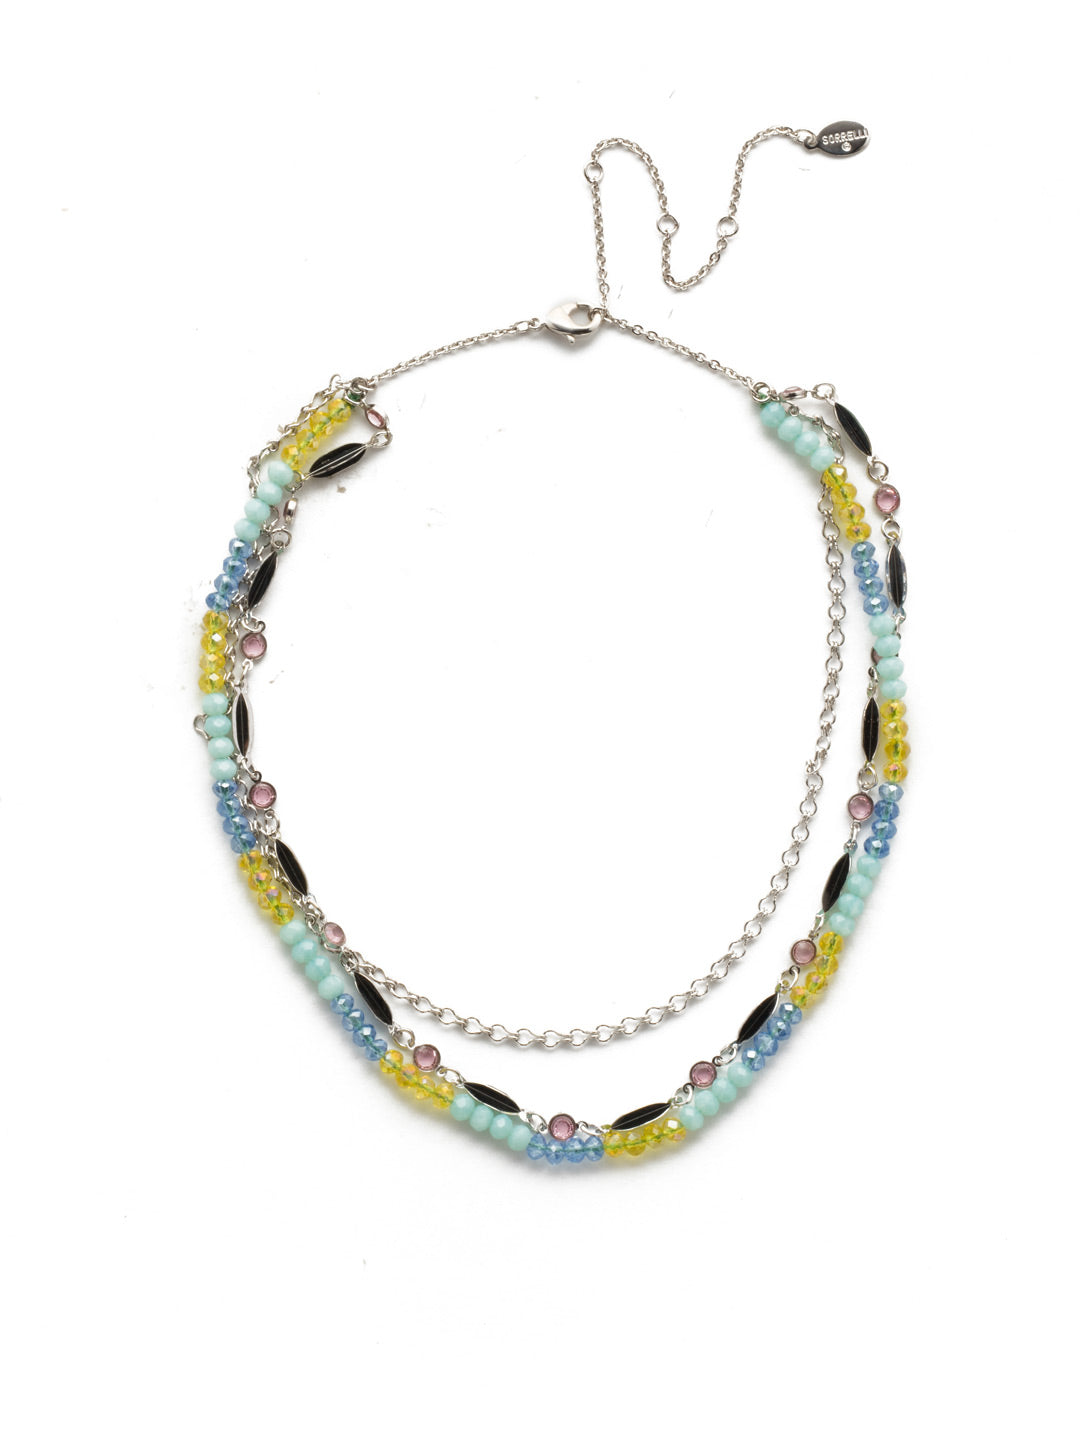 Daydream Layered Necklace - NEK35RHSSU - These layers have it all: delicate dots of crystals, beautiful beadwork and stylish metal accents in a classic necklace you'll find yourself grabbing again and again. From Sorrelli's Seersucker collection in our Palladium Silver-tone finish.